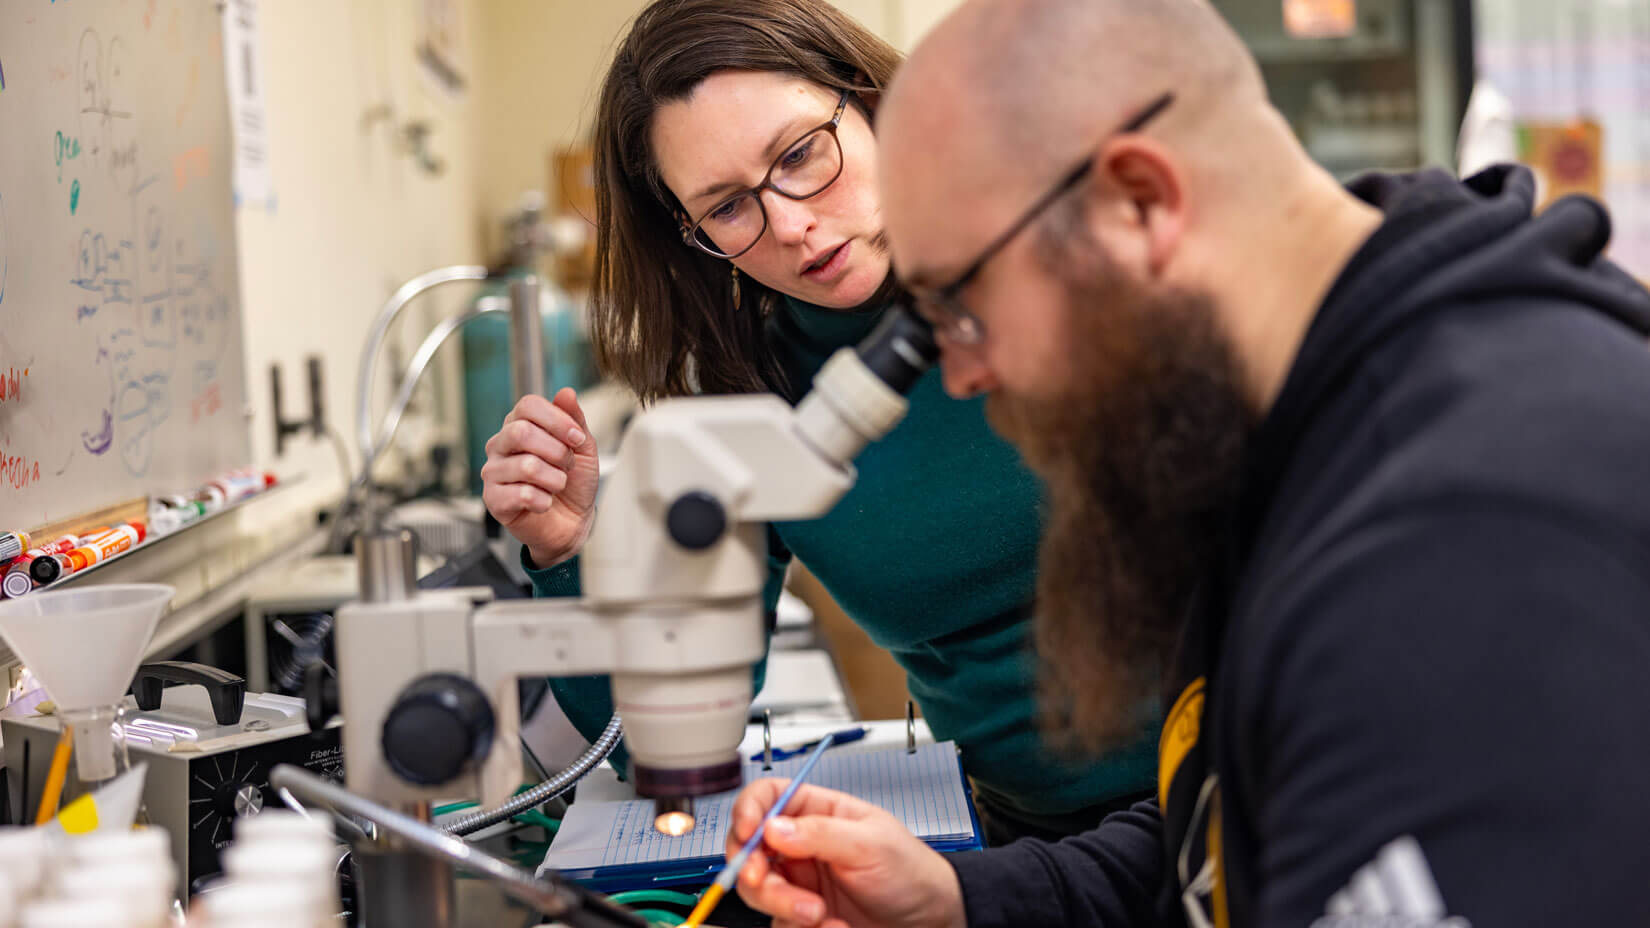 A student and professor in a lab examining a microscope slide together.